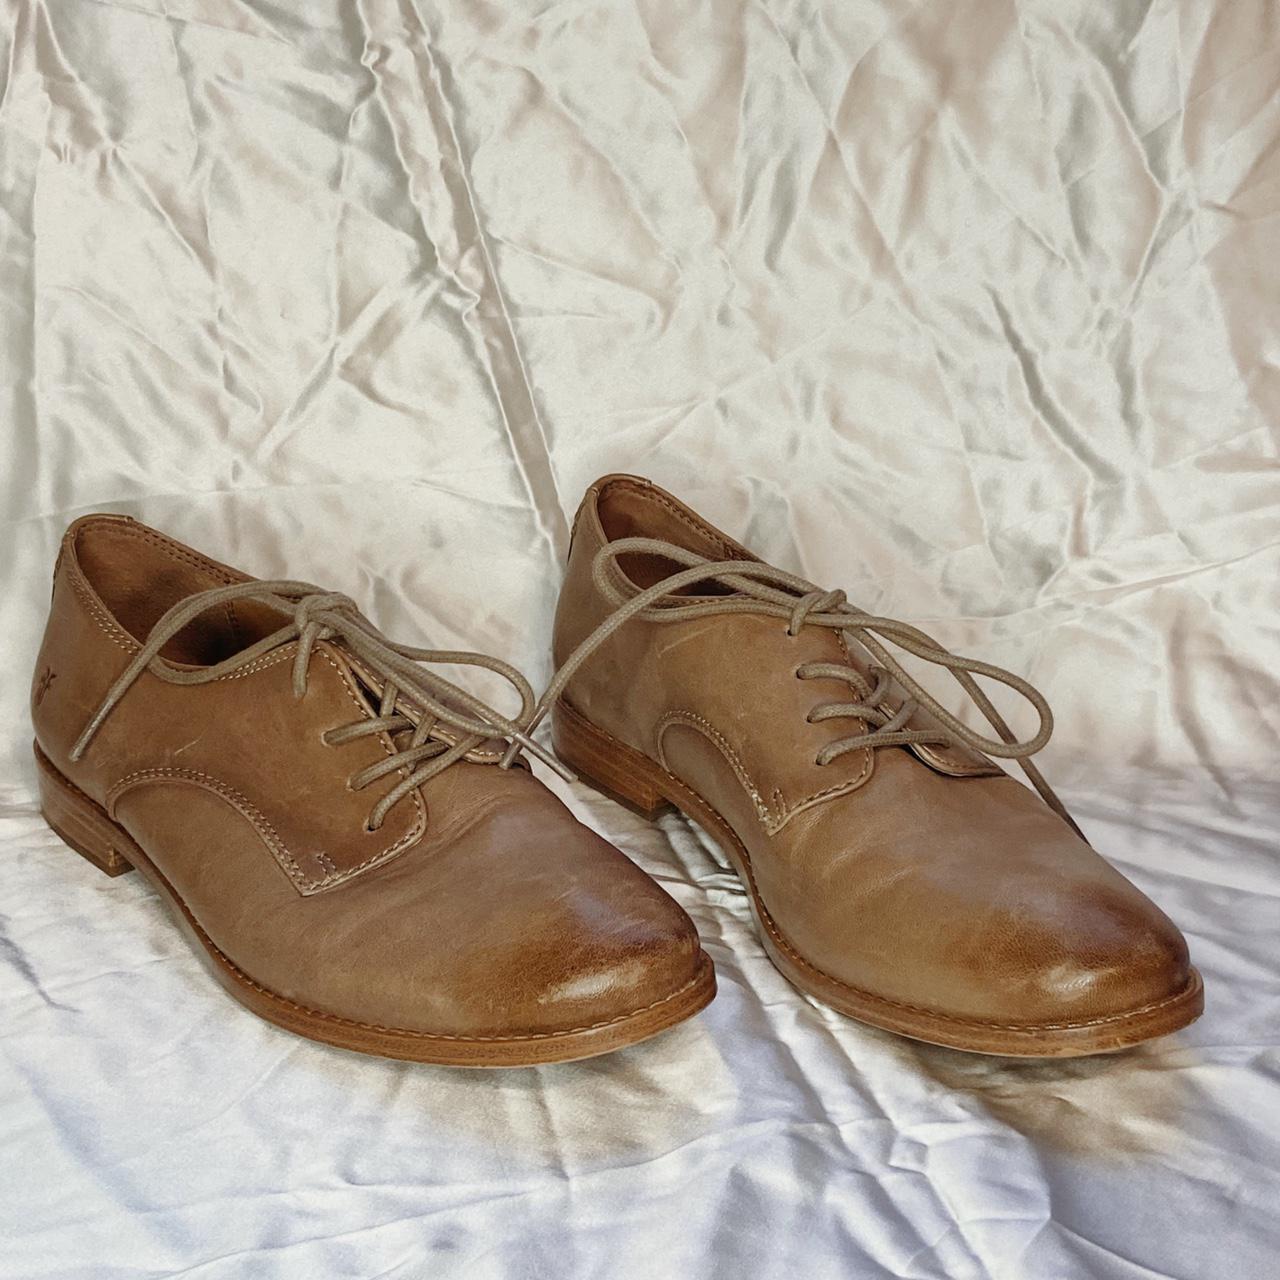 Product Image 1 - Frye tan leather oxford’s. 
Size